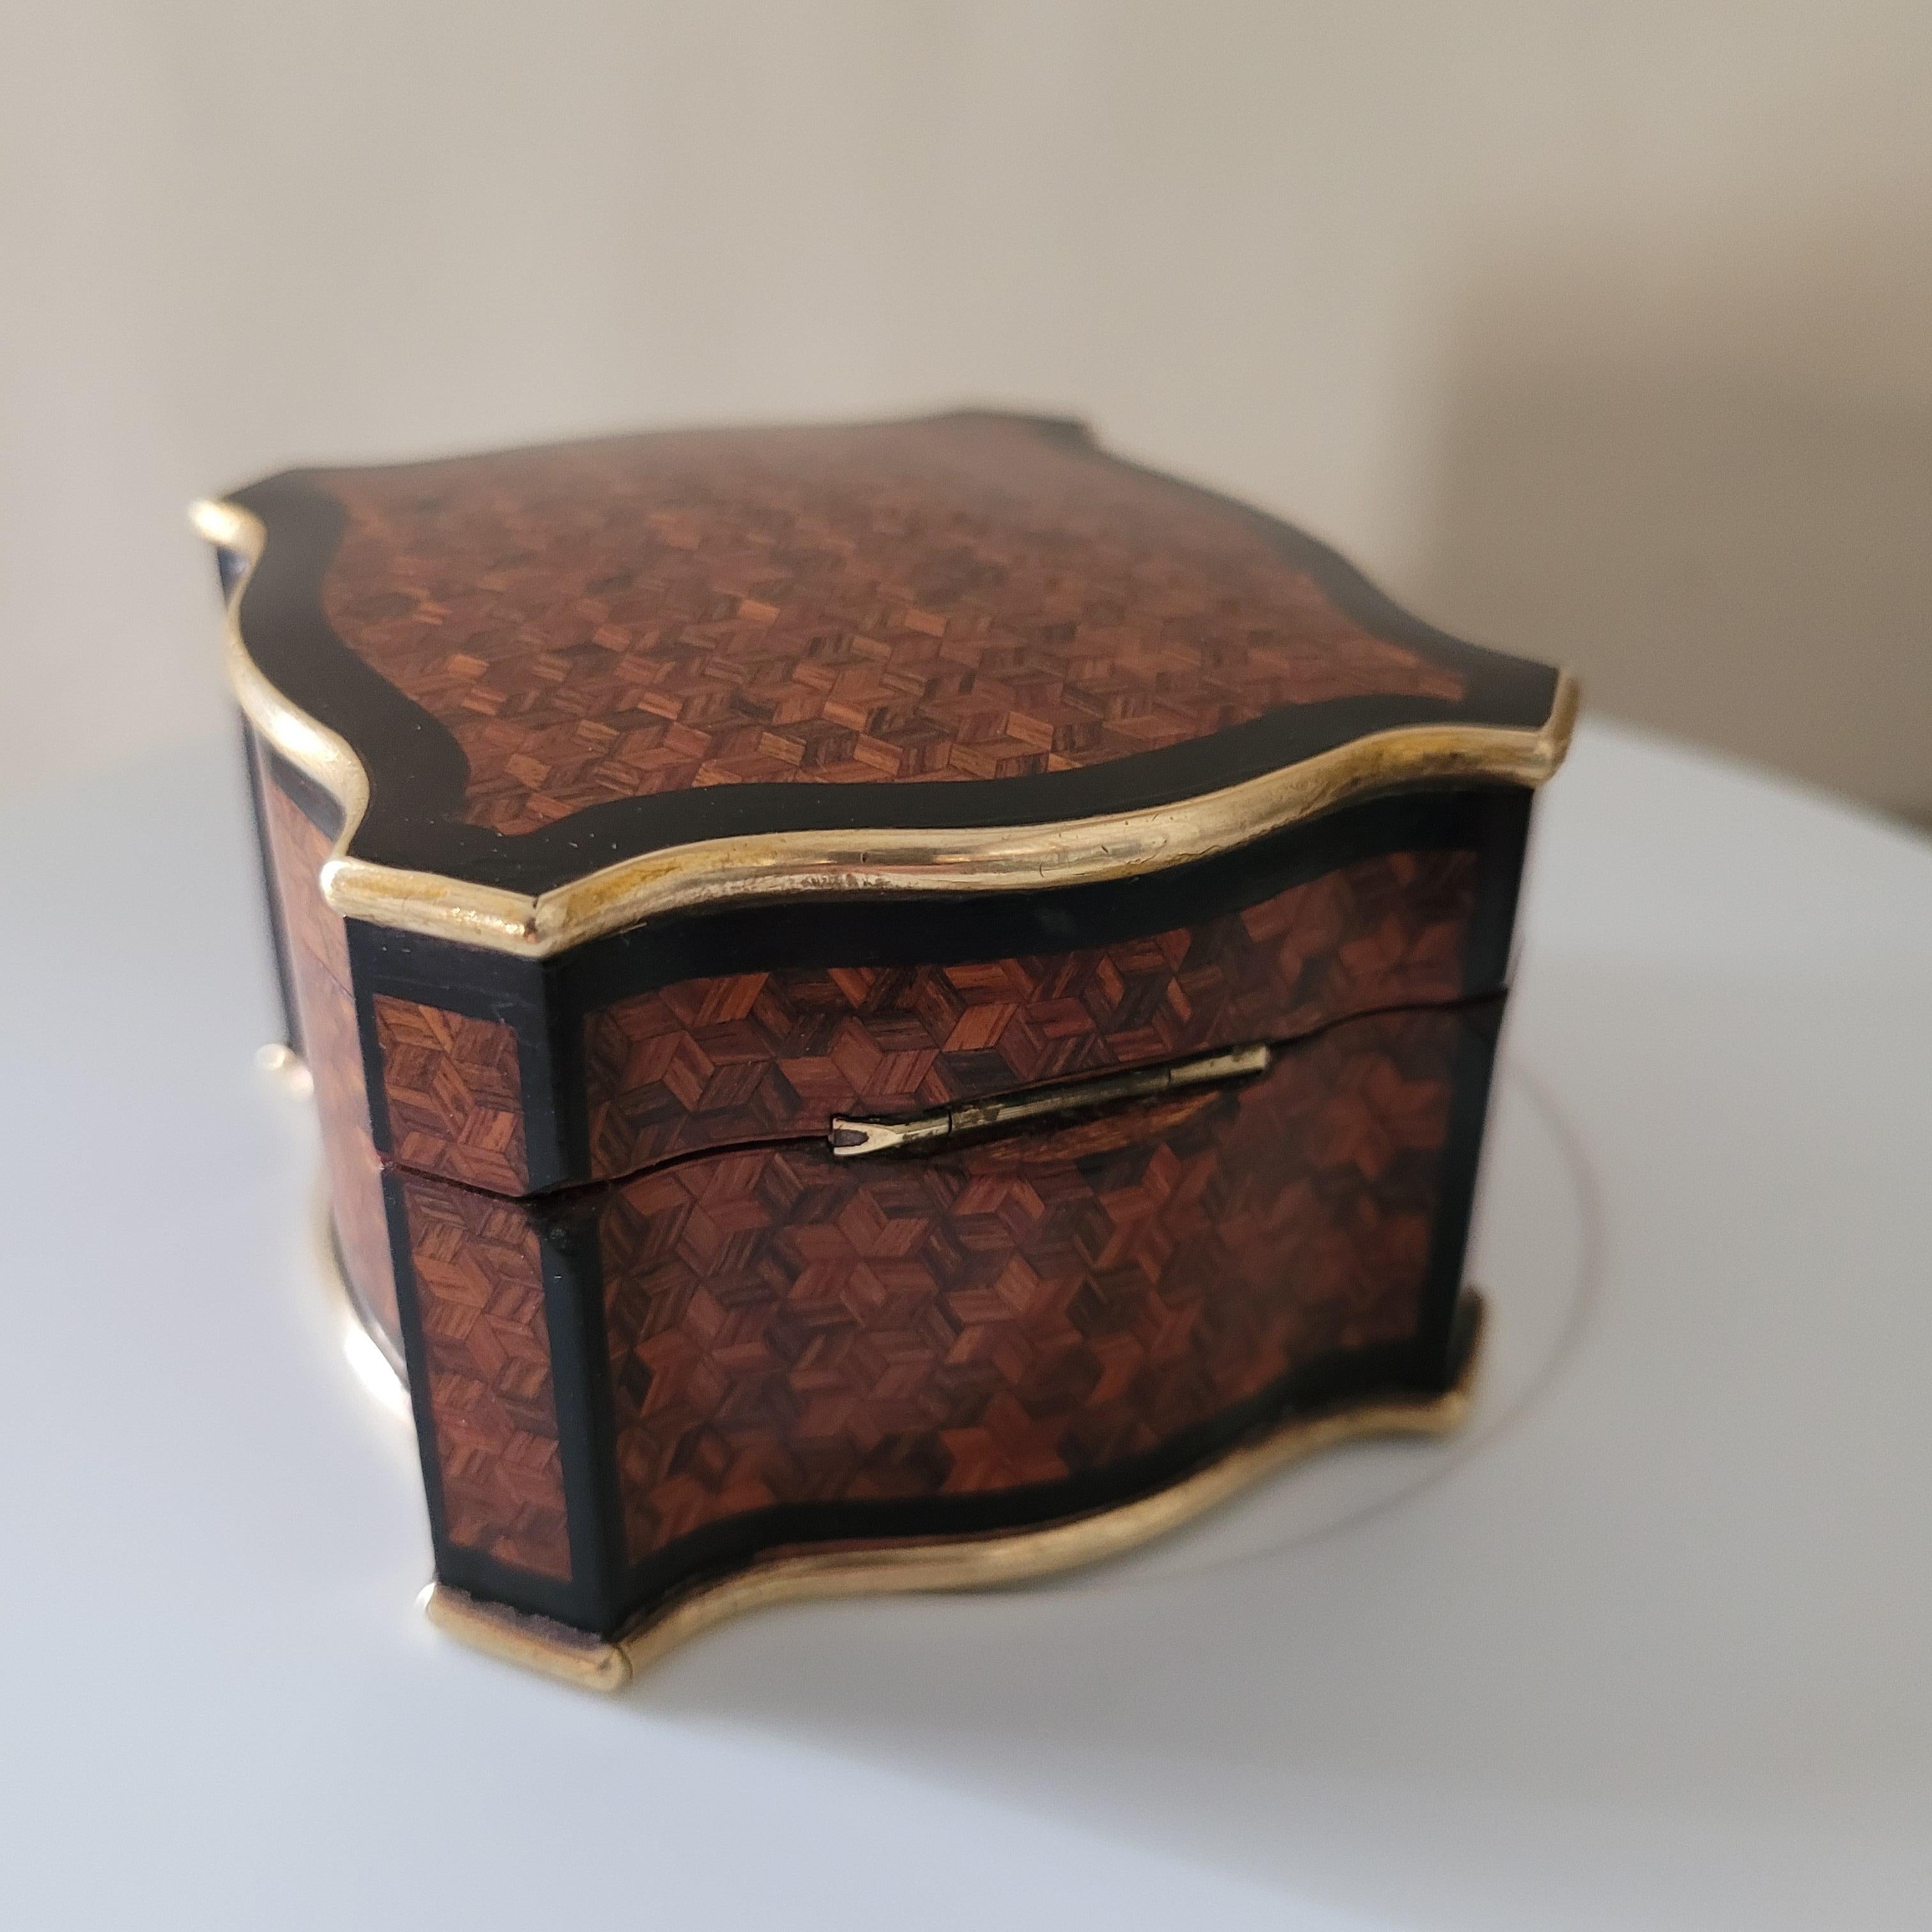 French TAHAN Watch Holder, Napoleon 3 Period Rosewood and Ebony Marquetry, Good Cond.